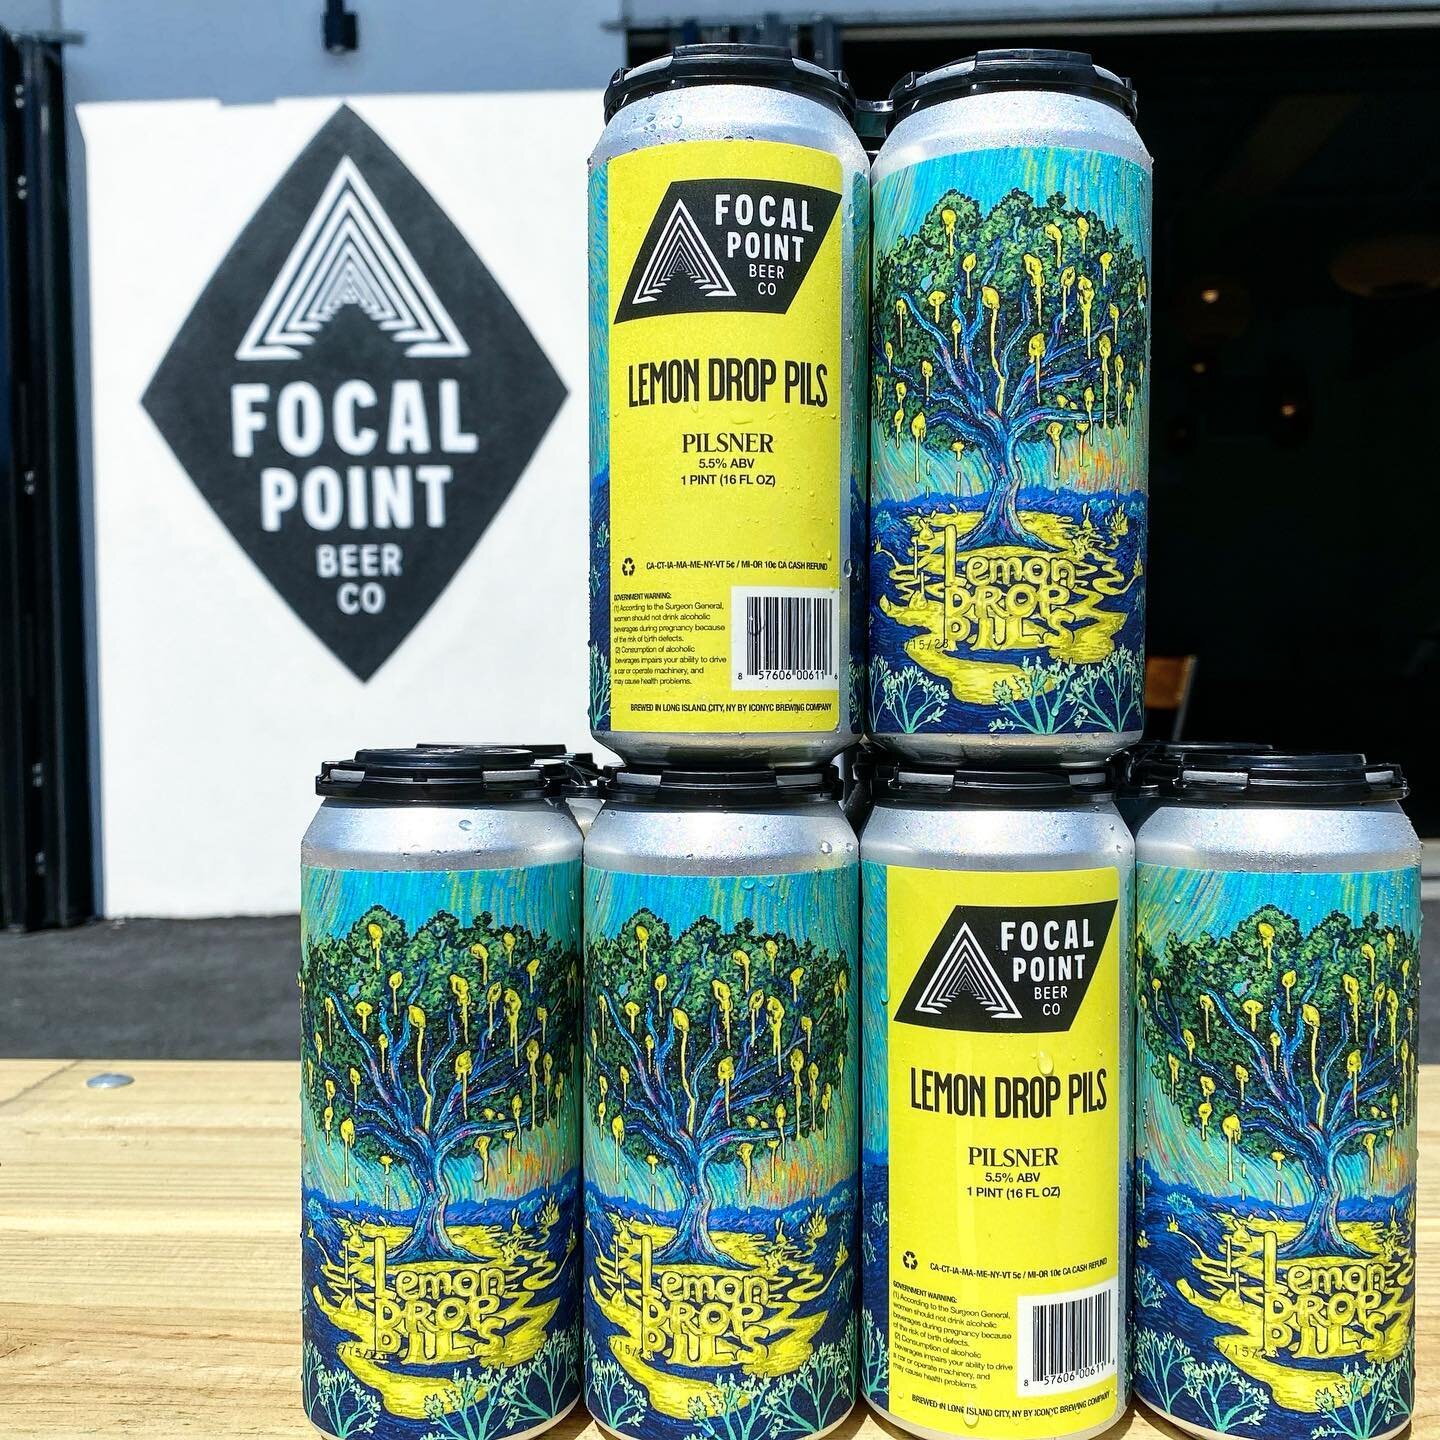 Lemon Drop Pils is BACK, BABY!
Lemon Drop hops for subtle notes of bright lemon zest. It&rsquo;s crazy refreshing? Irresistibly tasty, and it&rsquo;s our first cans with the new logo!

Come to 12th Street today and taste for yourself. Fresh out of th